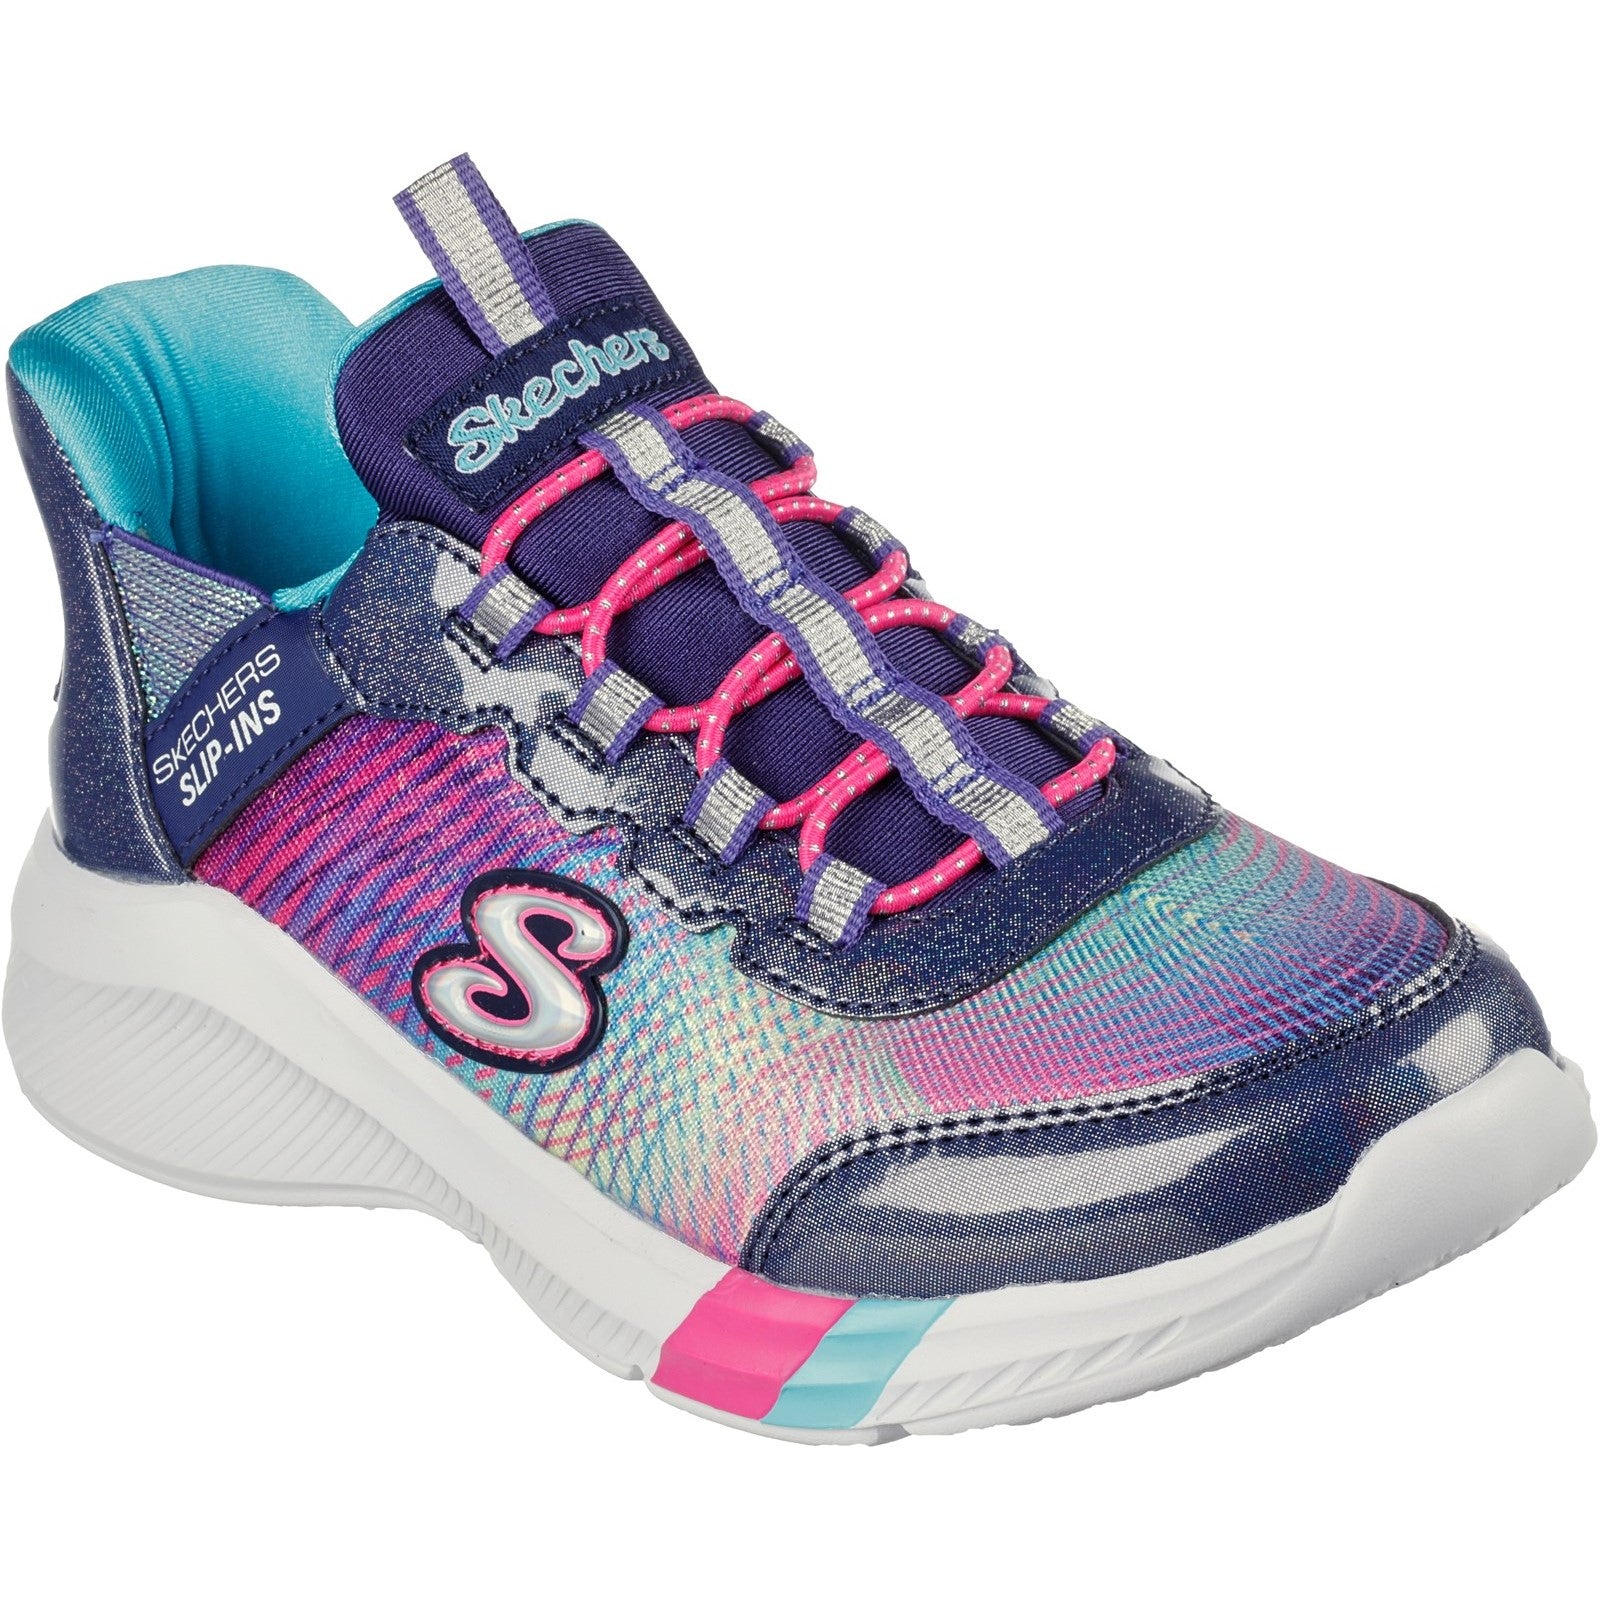 Skechers Girls Dreamy Lites Colorful Prism Slip On Trainers - Navy